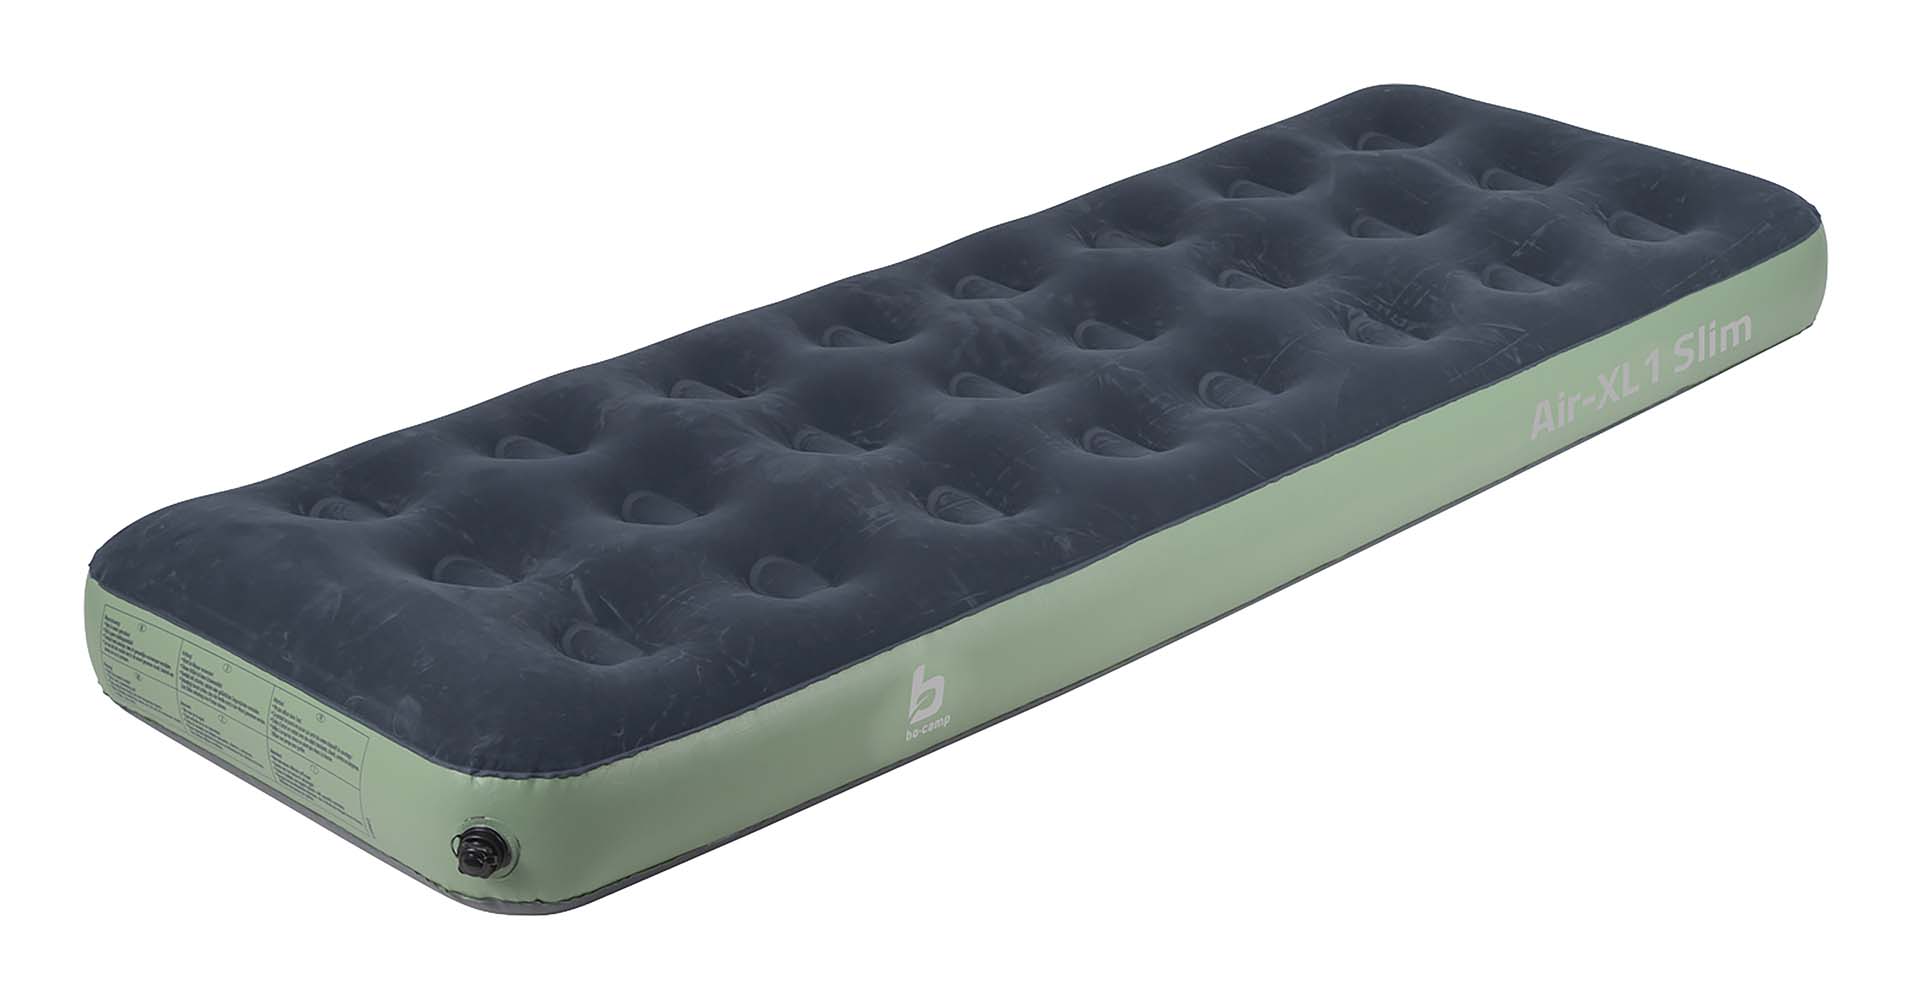 3107005 An extra long, durable and narrow air mattress. Due to its unique width, 2 air mattresses fit in an inner tent smaller than 150 centimetres. Has a large filling opening with double valve. This allows the air mattress to rapidly inflate and deflate. Equipped with an extra soft suede top layer for extra comfort.